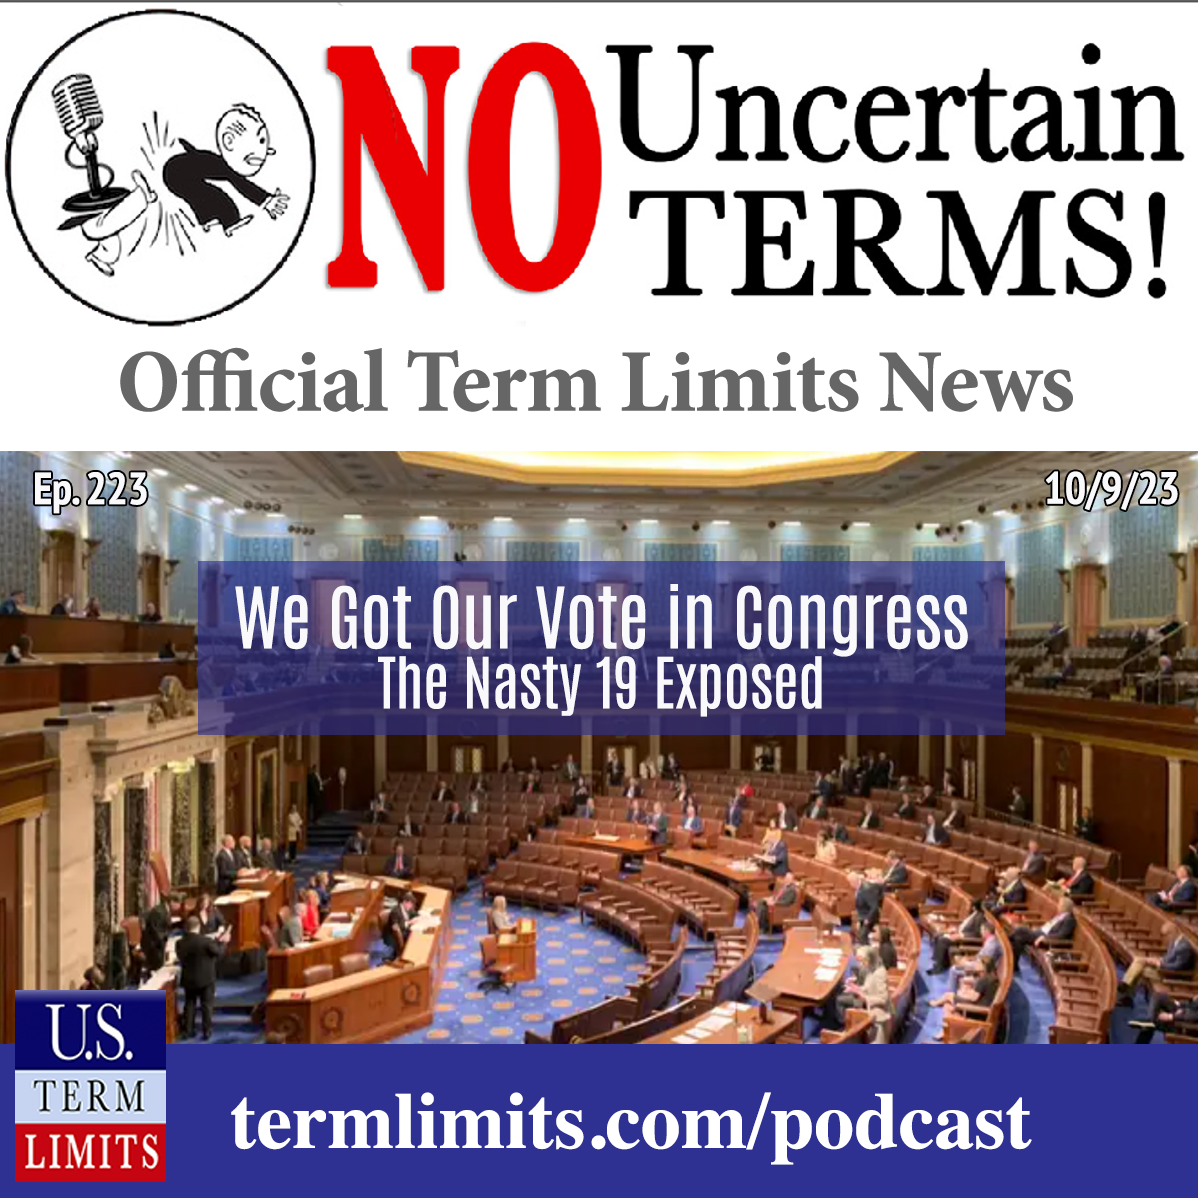 You're Wrong About Term Limits